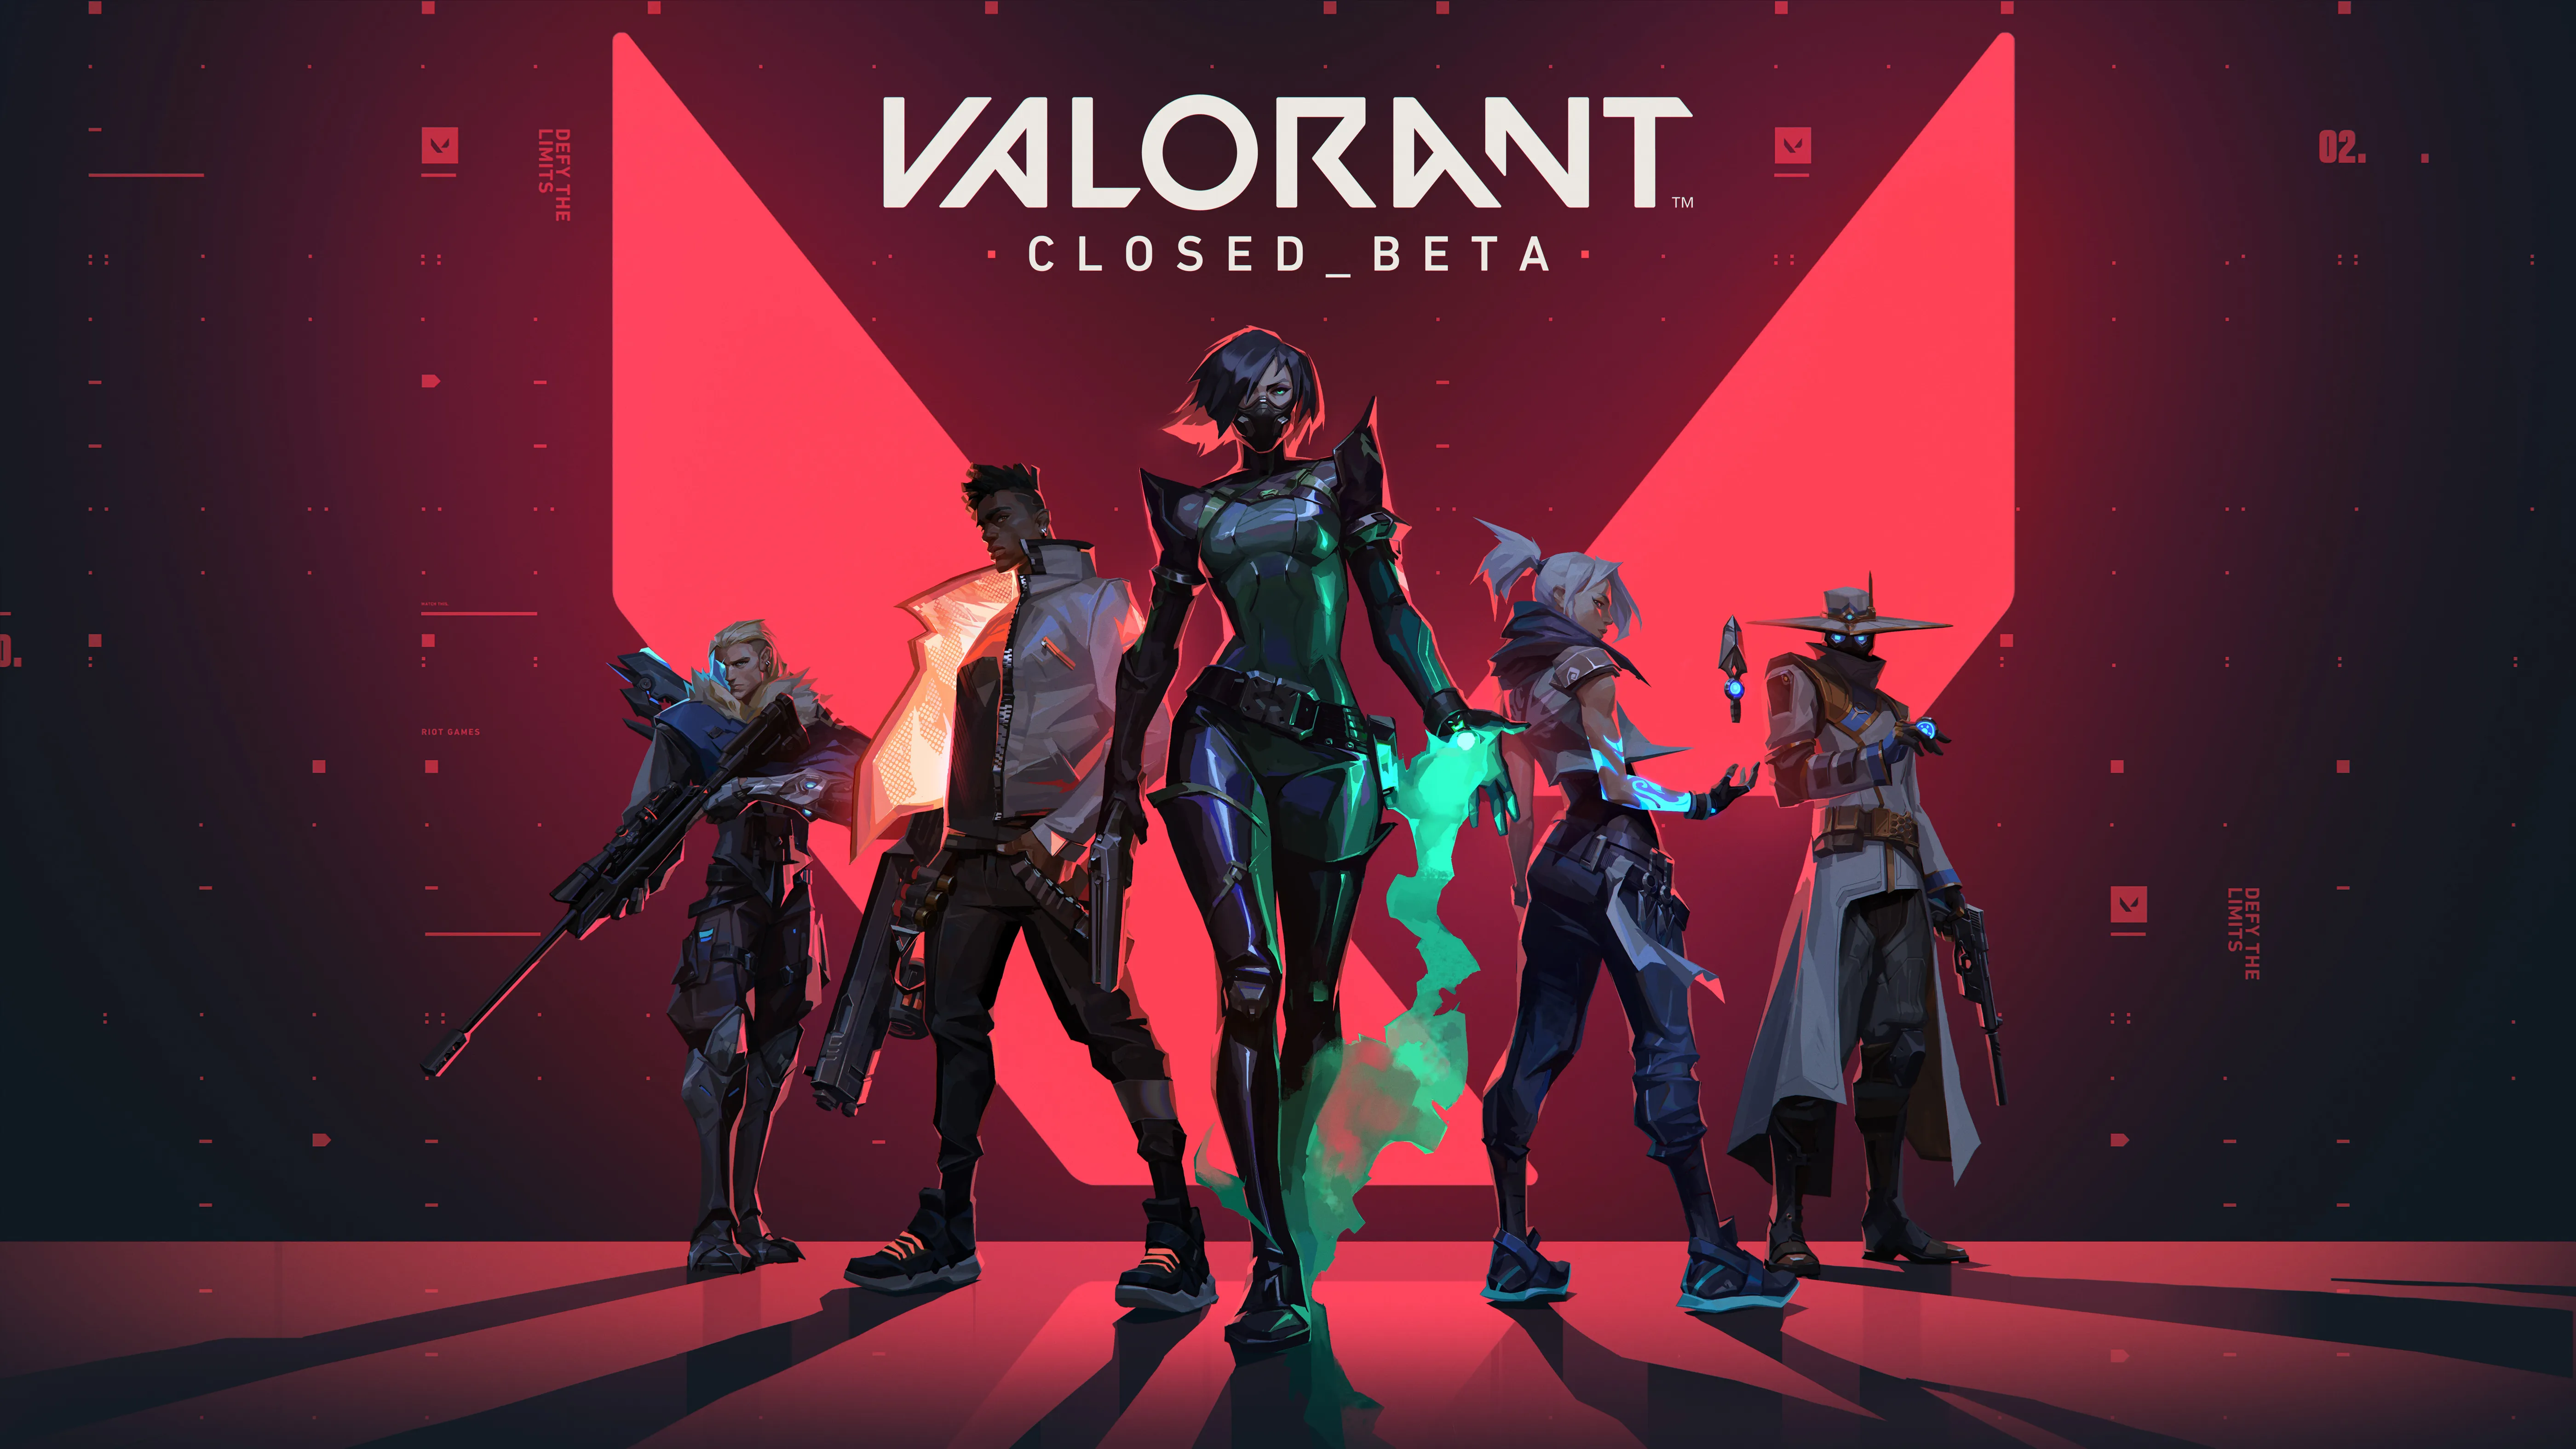 Run the installer and follow the on-screen instructions to install Valorant
Launch the game and check if the dot exe valorant Windows version compatibility issue persists